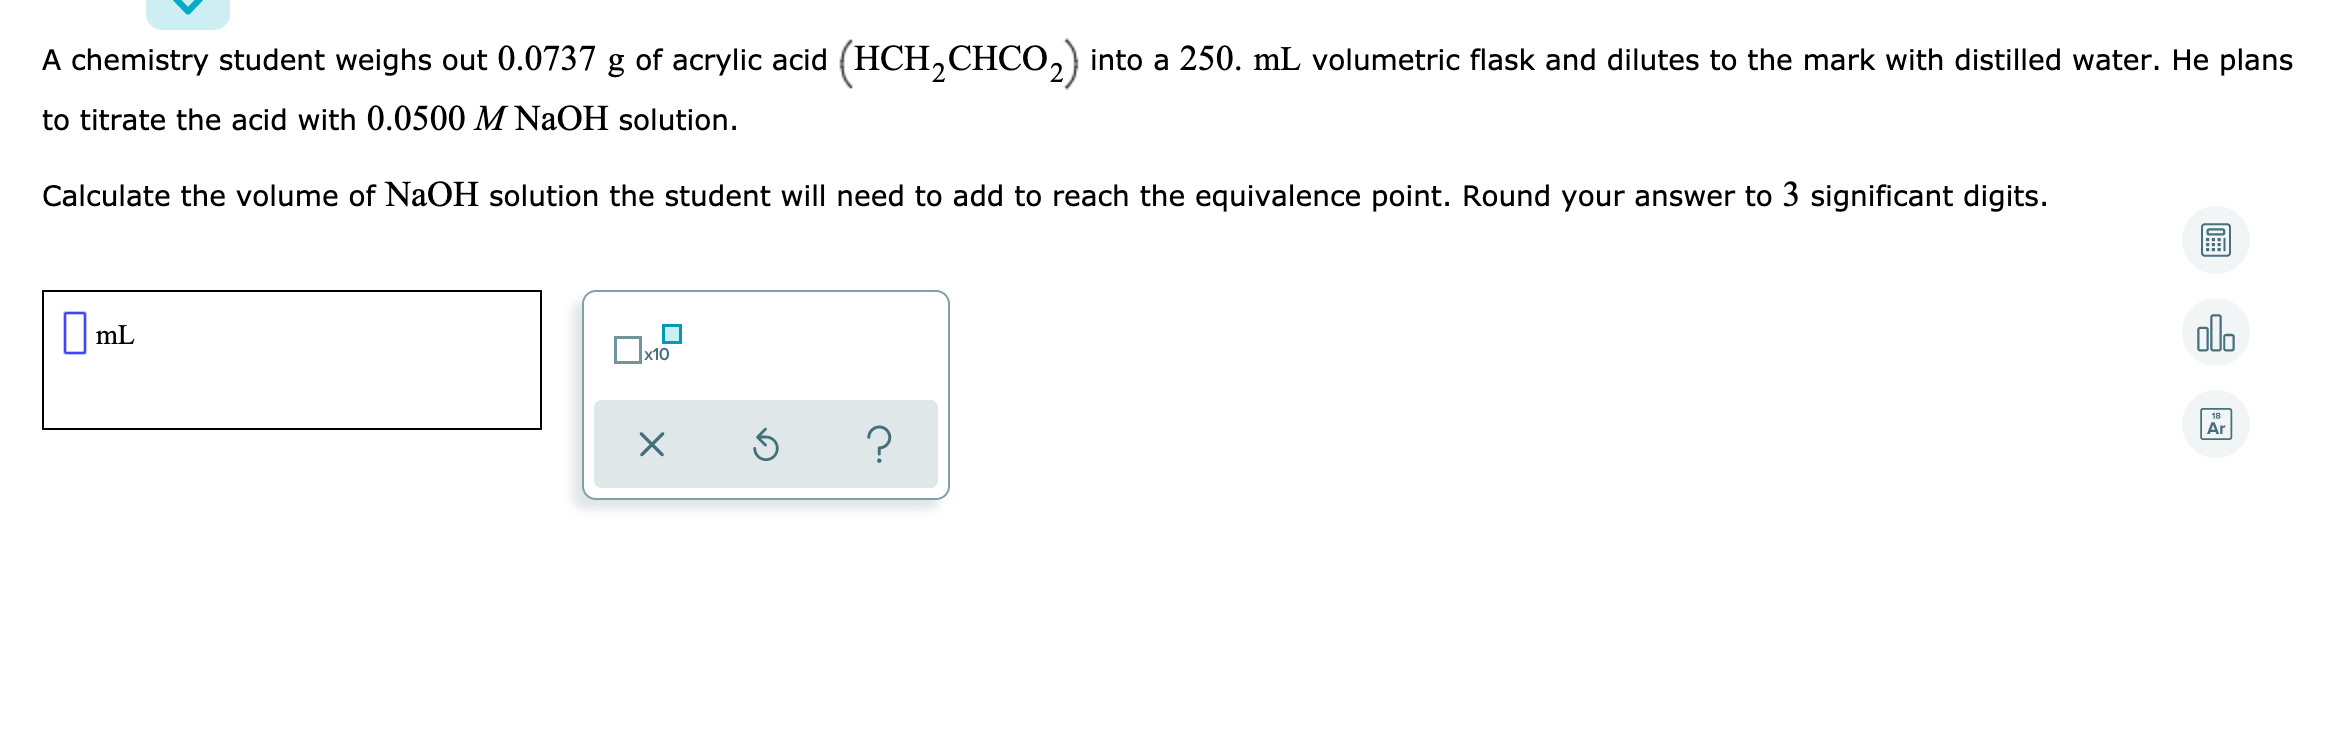 A chemistry student weighs out 0.0737 g of acrylic acid (HCH,CHCO,) into a 250. mL volumetric flask and dilutes to the mark with distilled water. He plans
to titrate the acid with 0.0500 M NaOH solution.
Calculate the volume of NaOH solution the student will need to add to reach the equivalence point. Round your answer to 3 significant digits.
|mL
olo
x10
Ar
